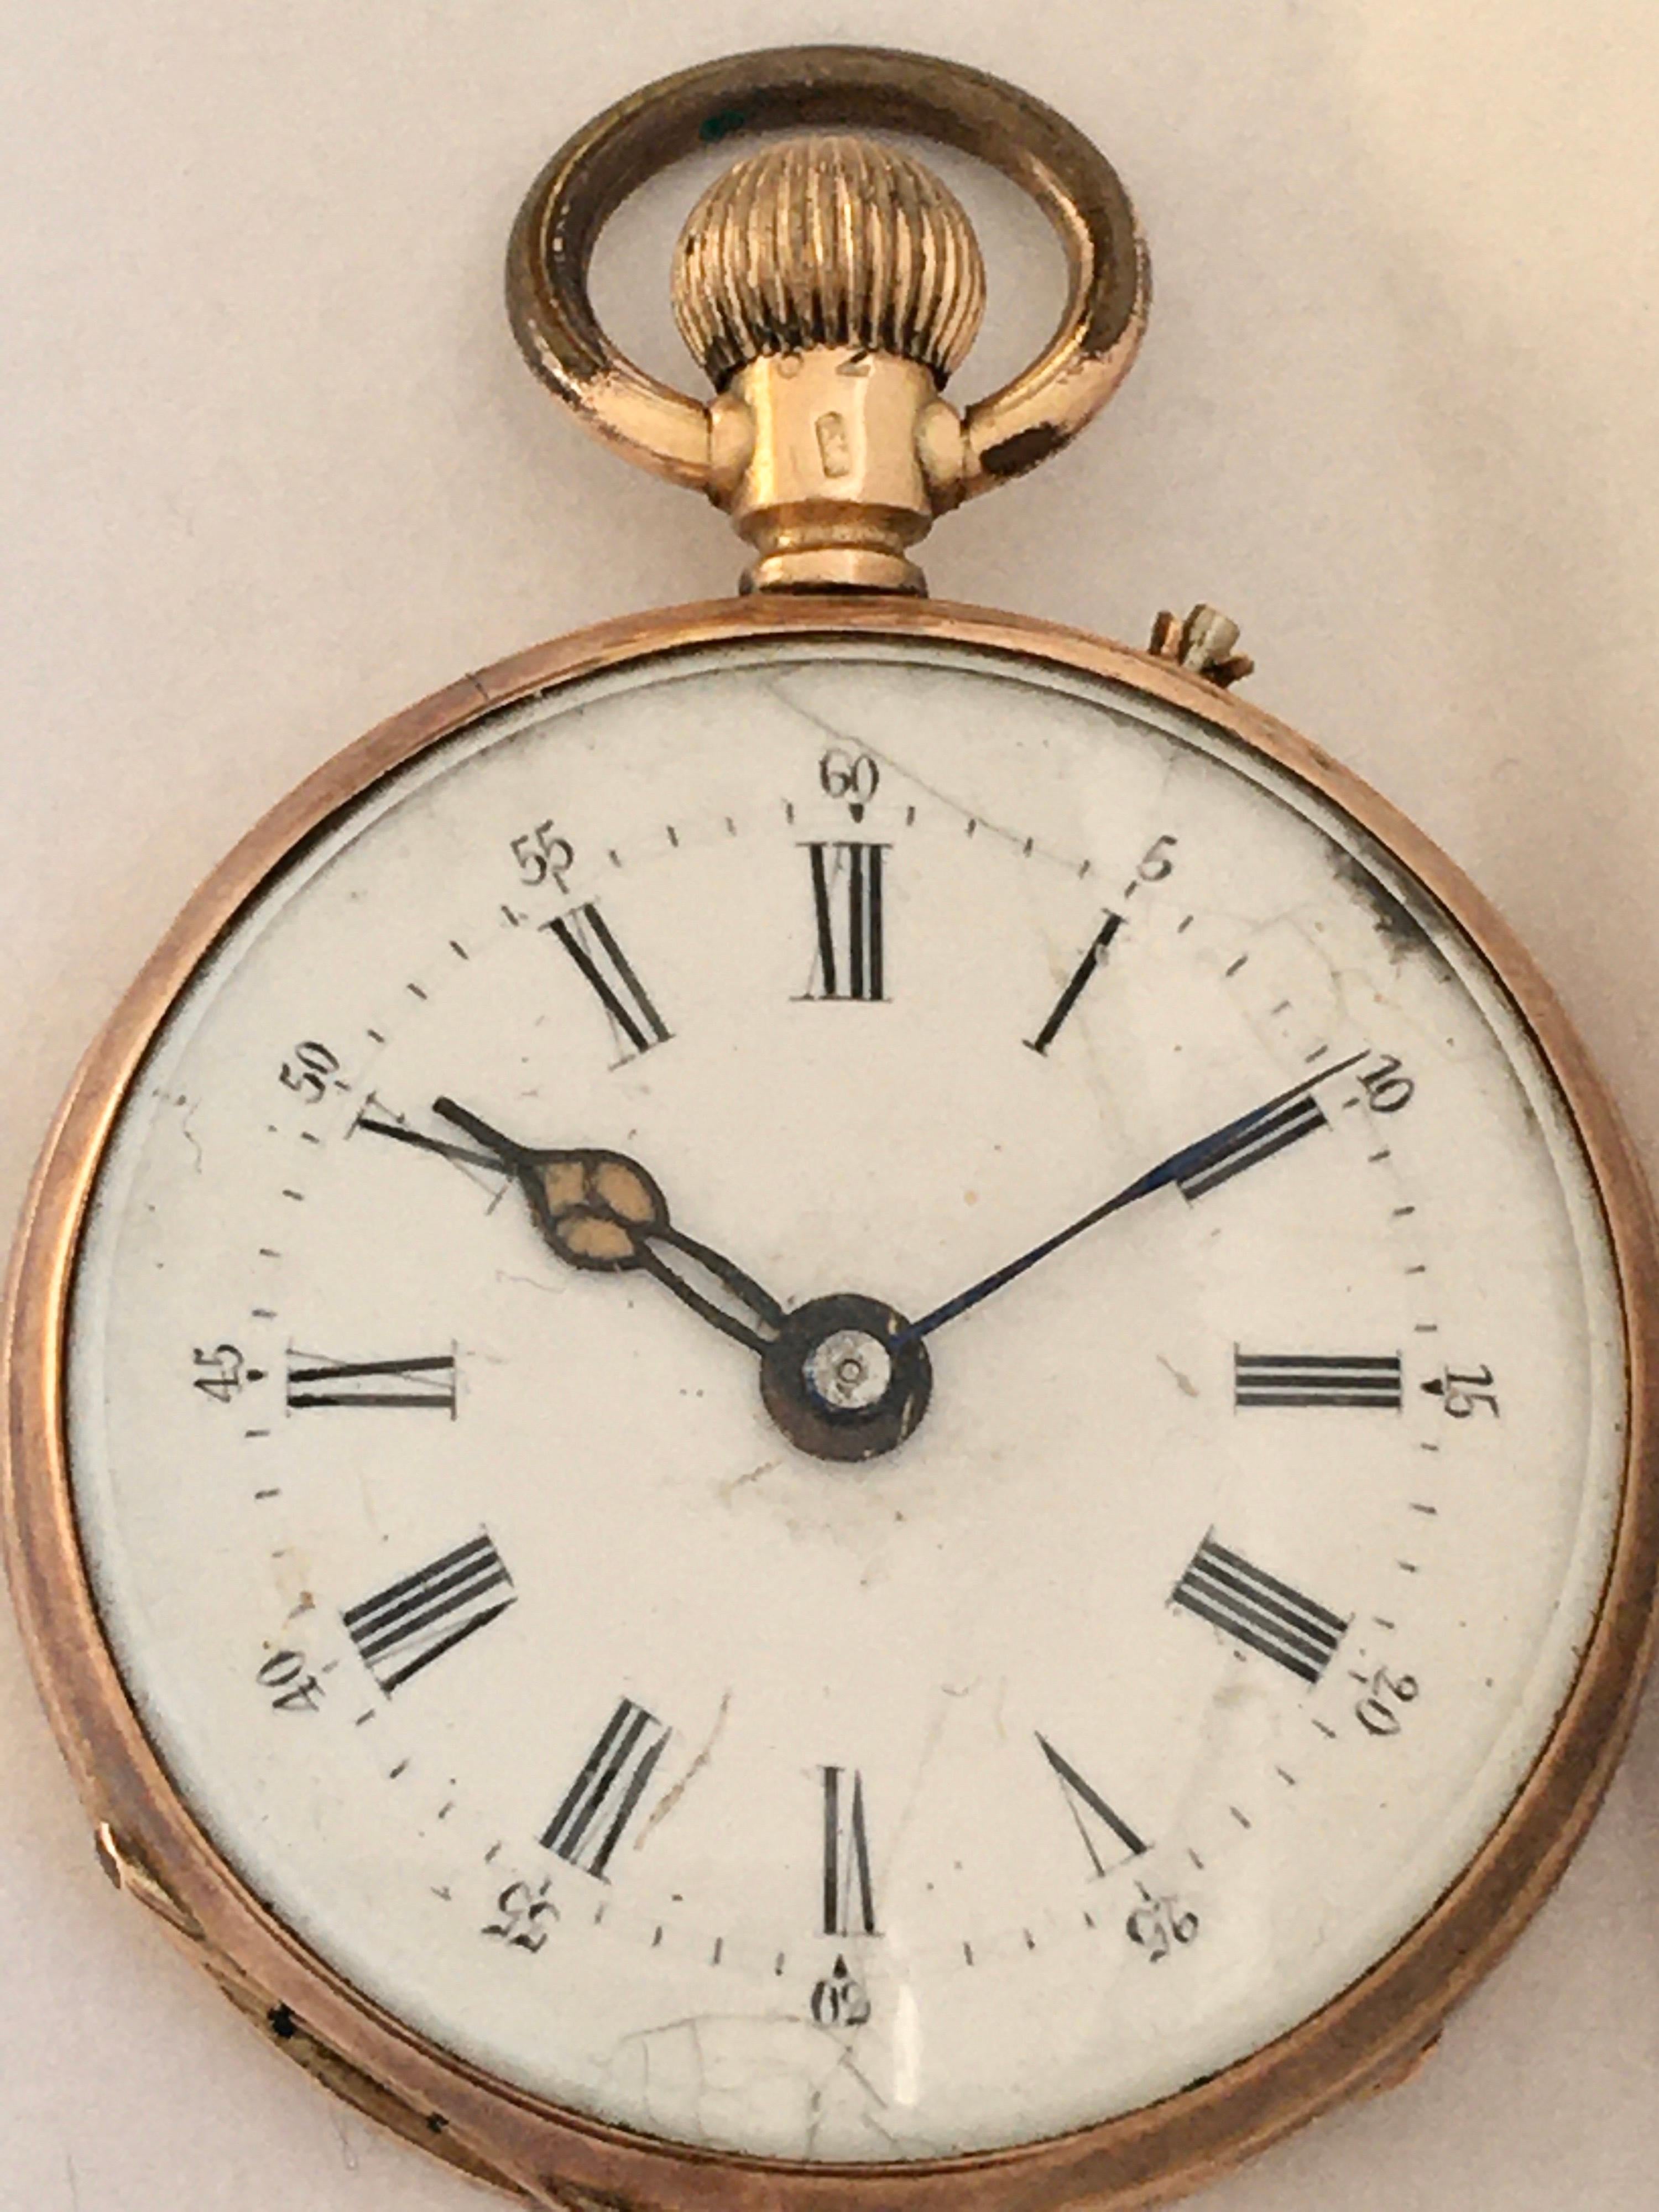 This 14K Gold & engine turned case small pocket watch is in good working condition and it is recently been serviced and runs well. Good time keeping. Visible signs of ageing and wear with tiny  cracks and chipped on the dial as shown. Hour hand has